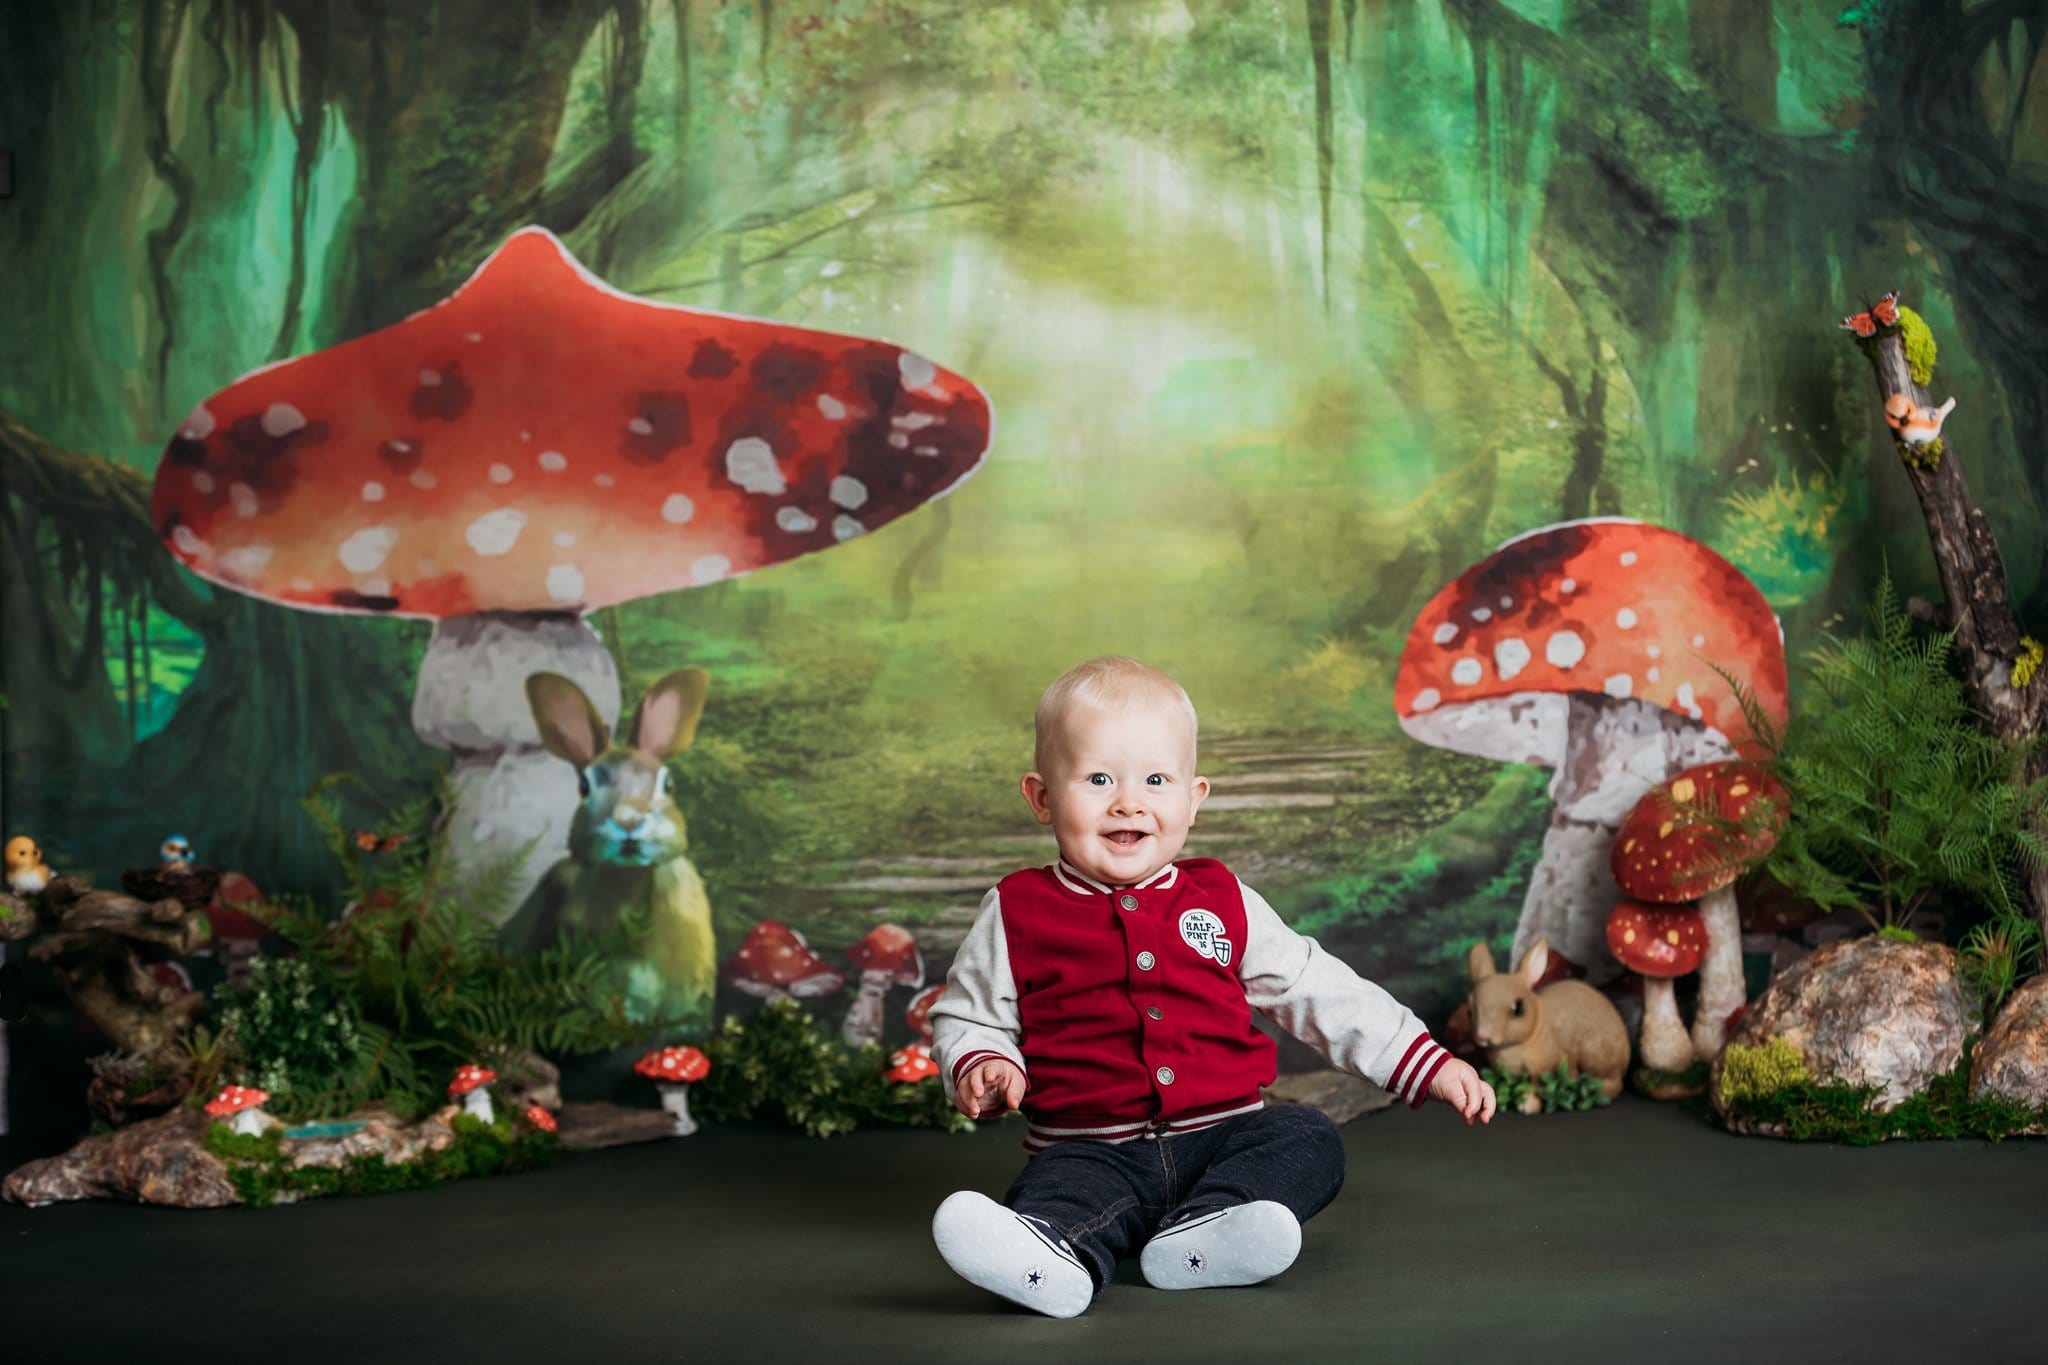 Kate Fairy Backdrop Mushroom Forest Bunny Alice Designed by Chain Photography